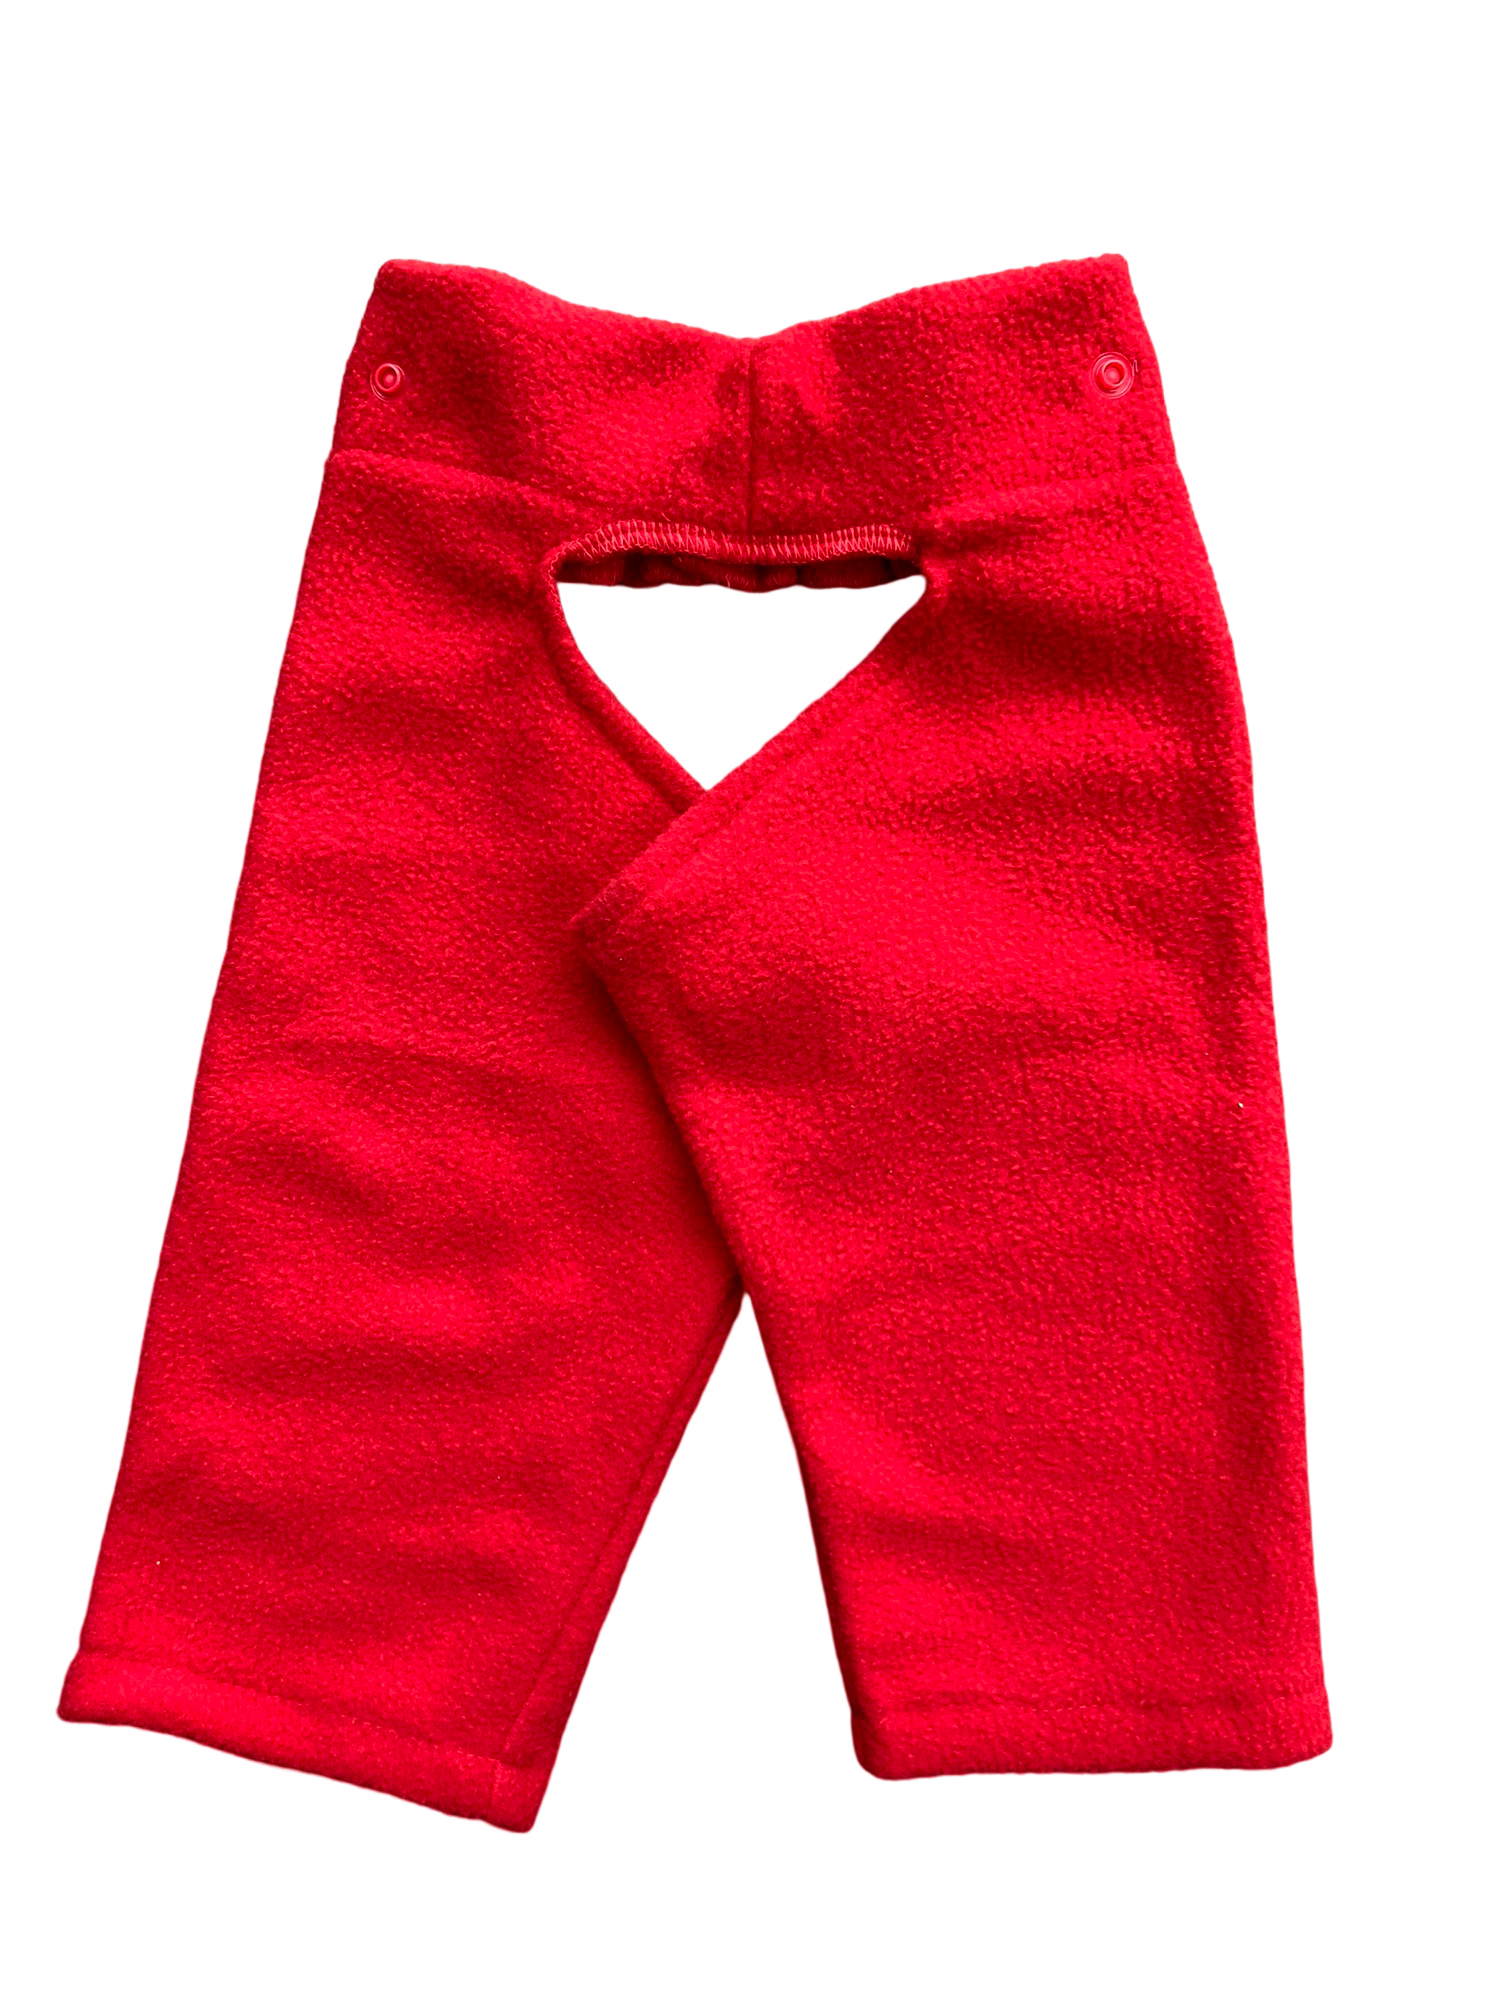 Candy Apple Red Chappy-Couche Pantalon